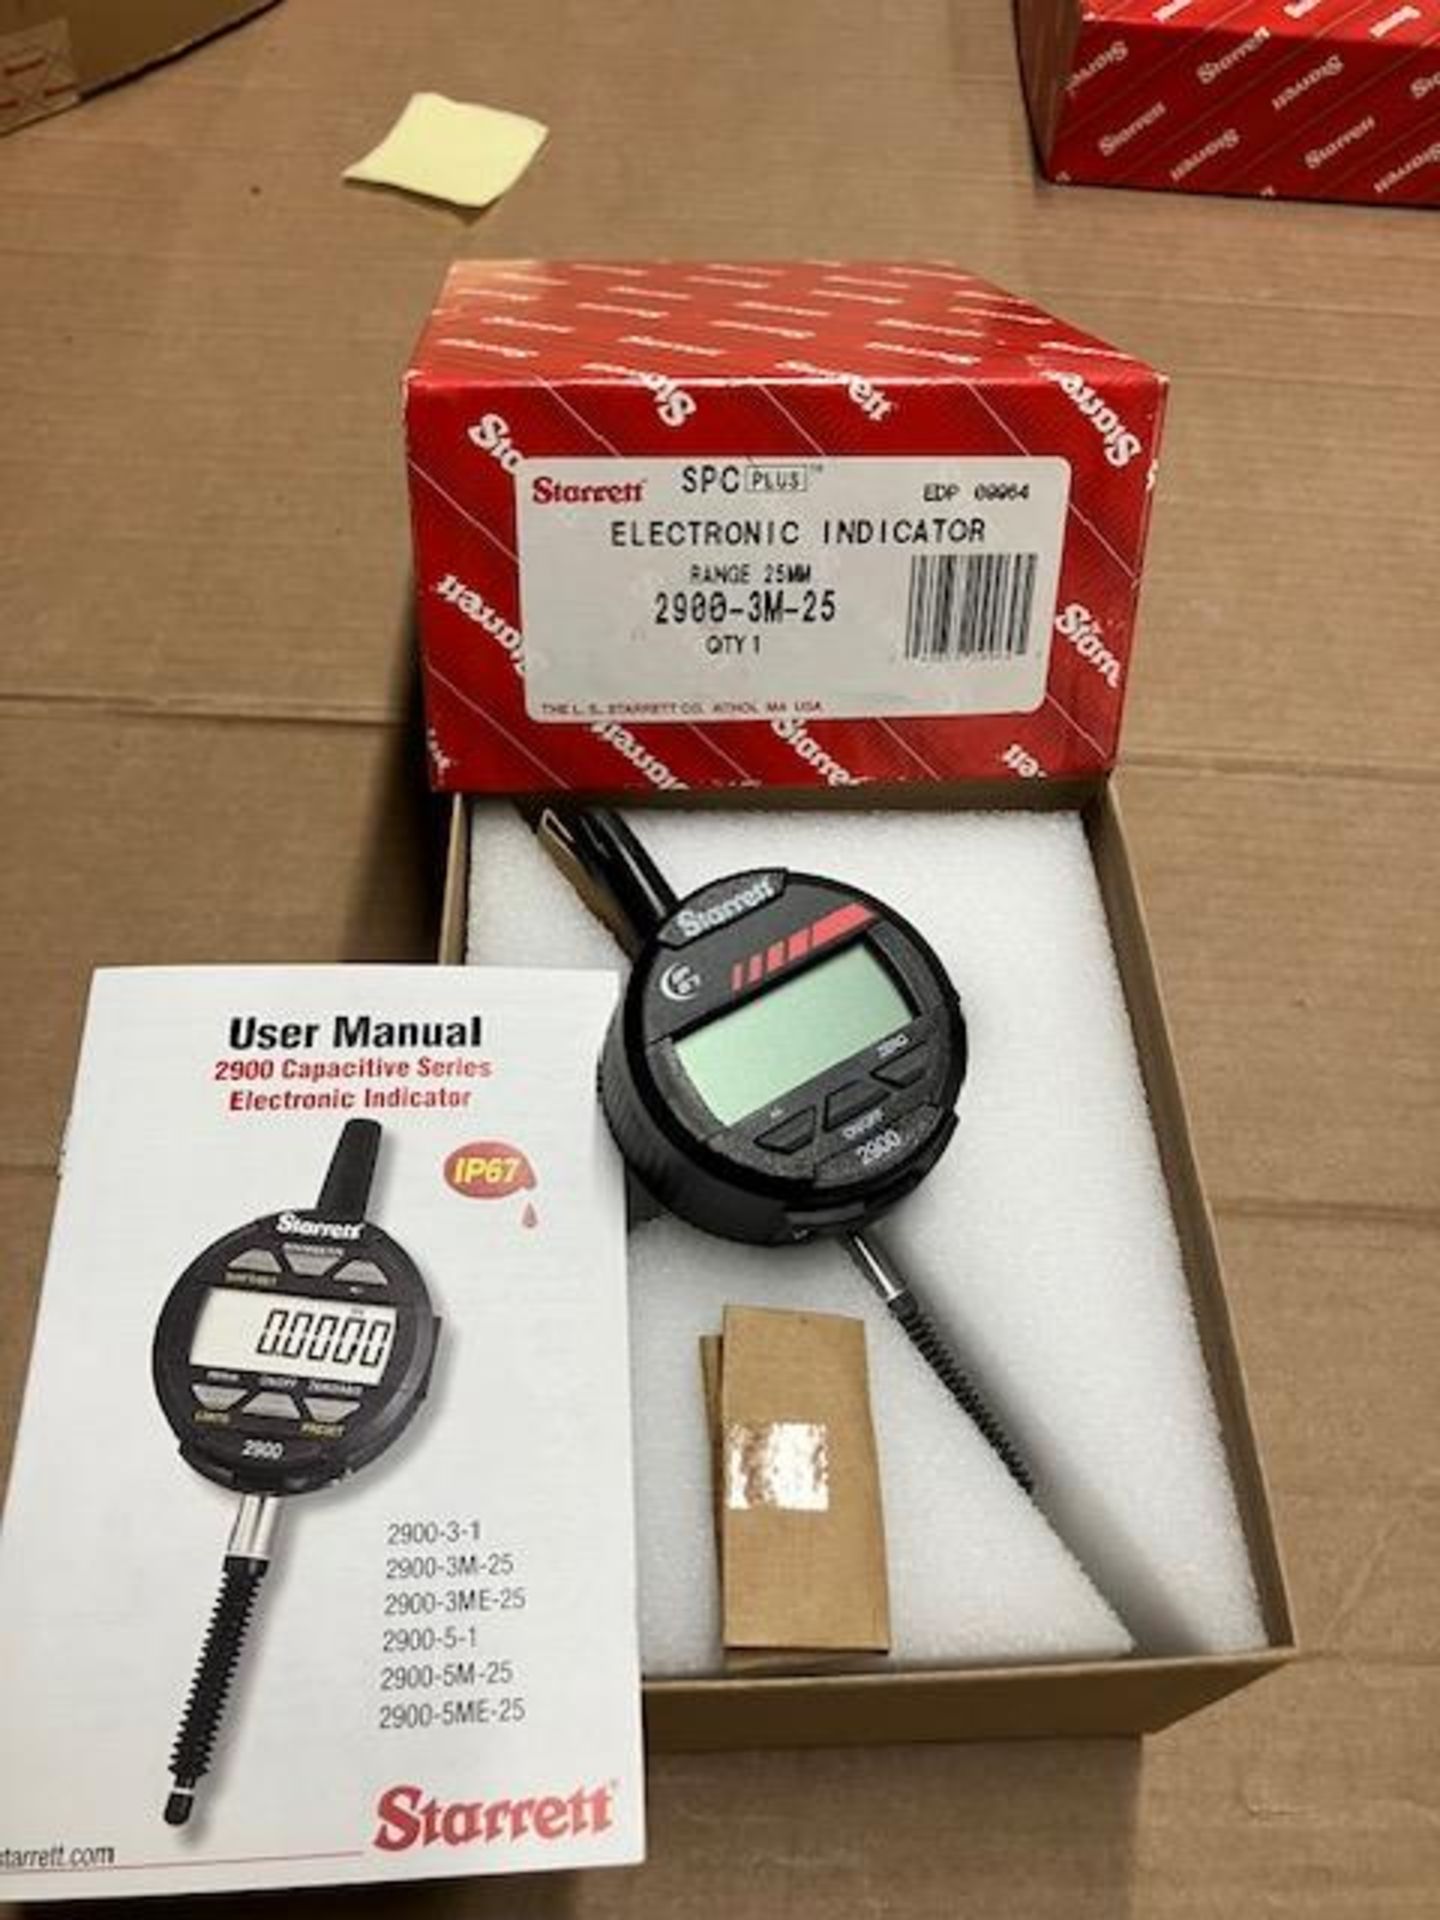 Model 2900-3M-25 Electronic Digital Indicator. IP67 Protection. SPC Output. 25mm Range. 0.01mm Res.